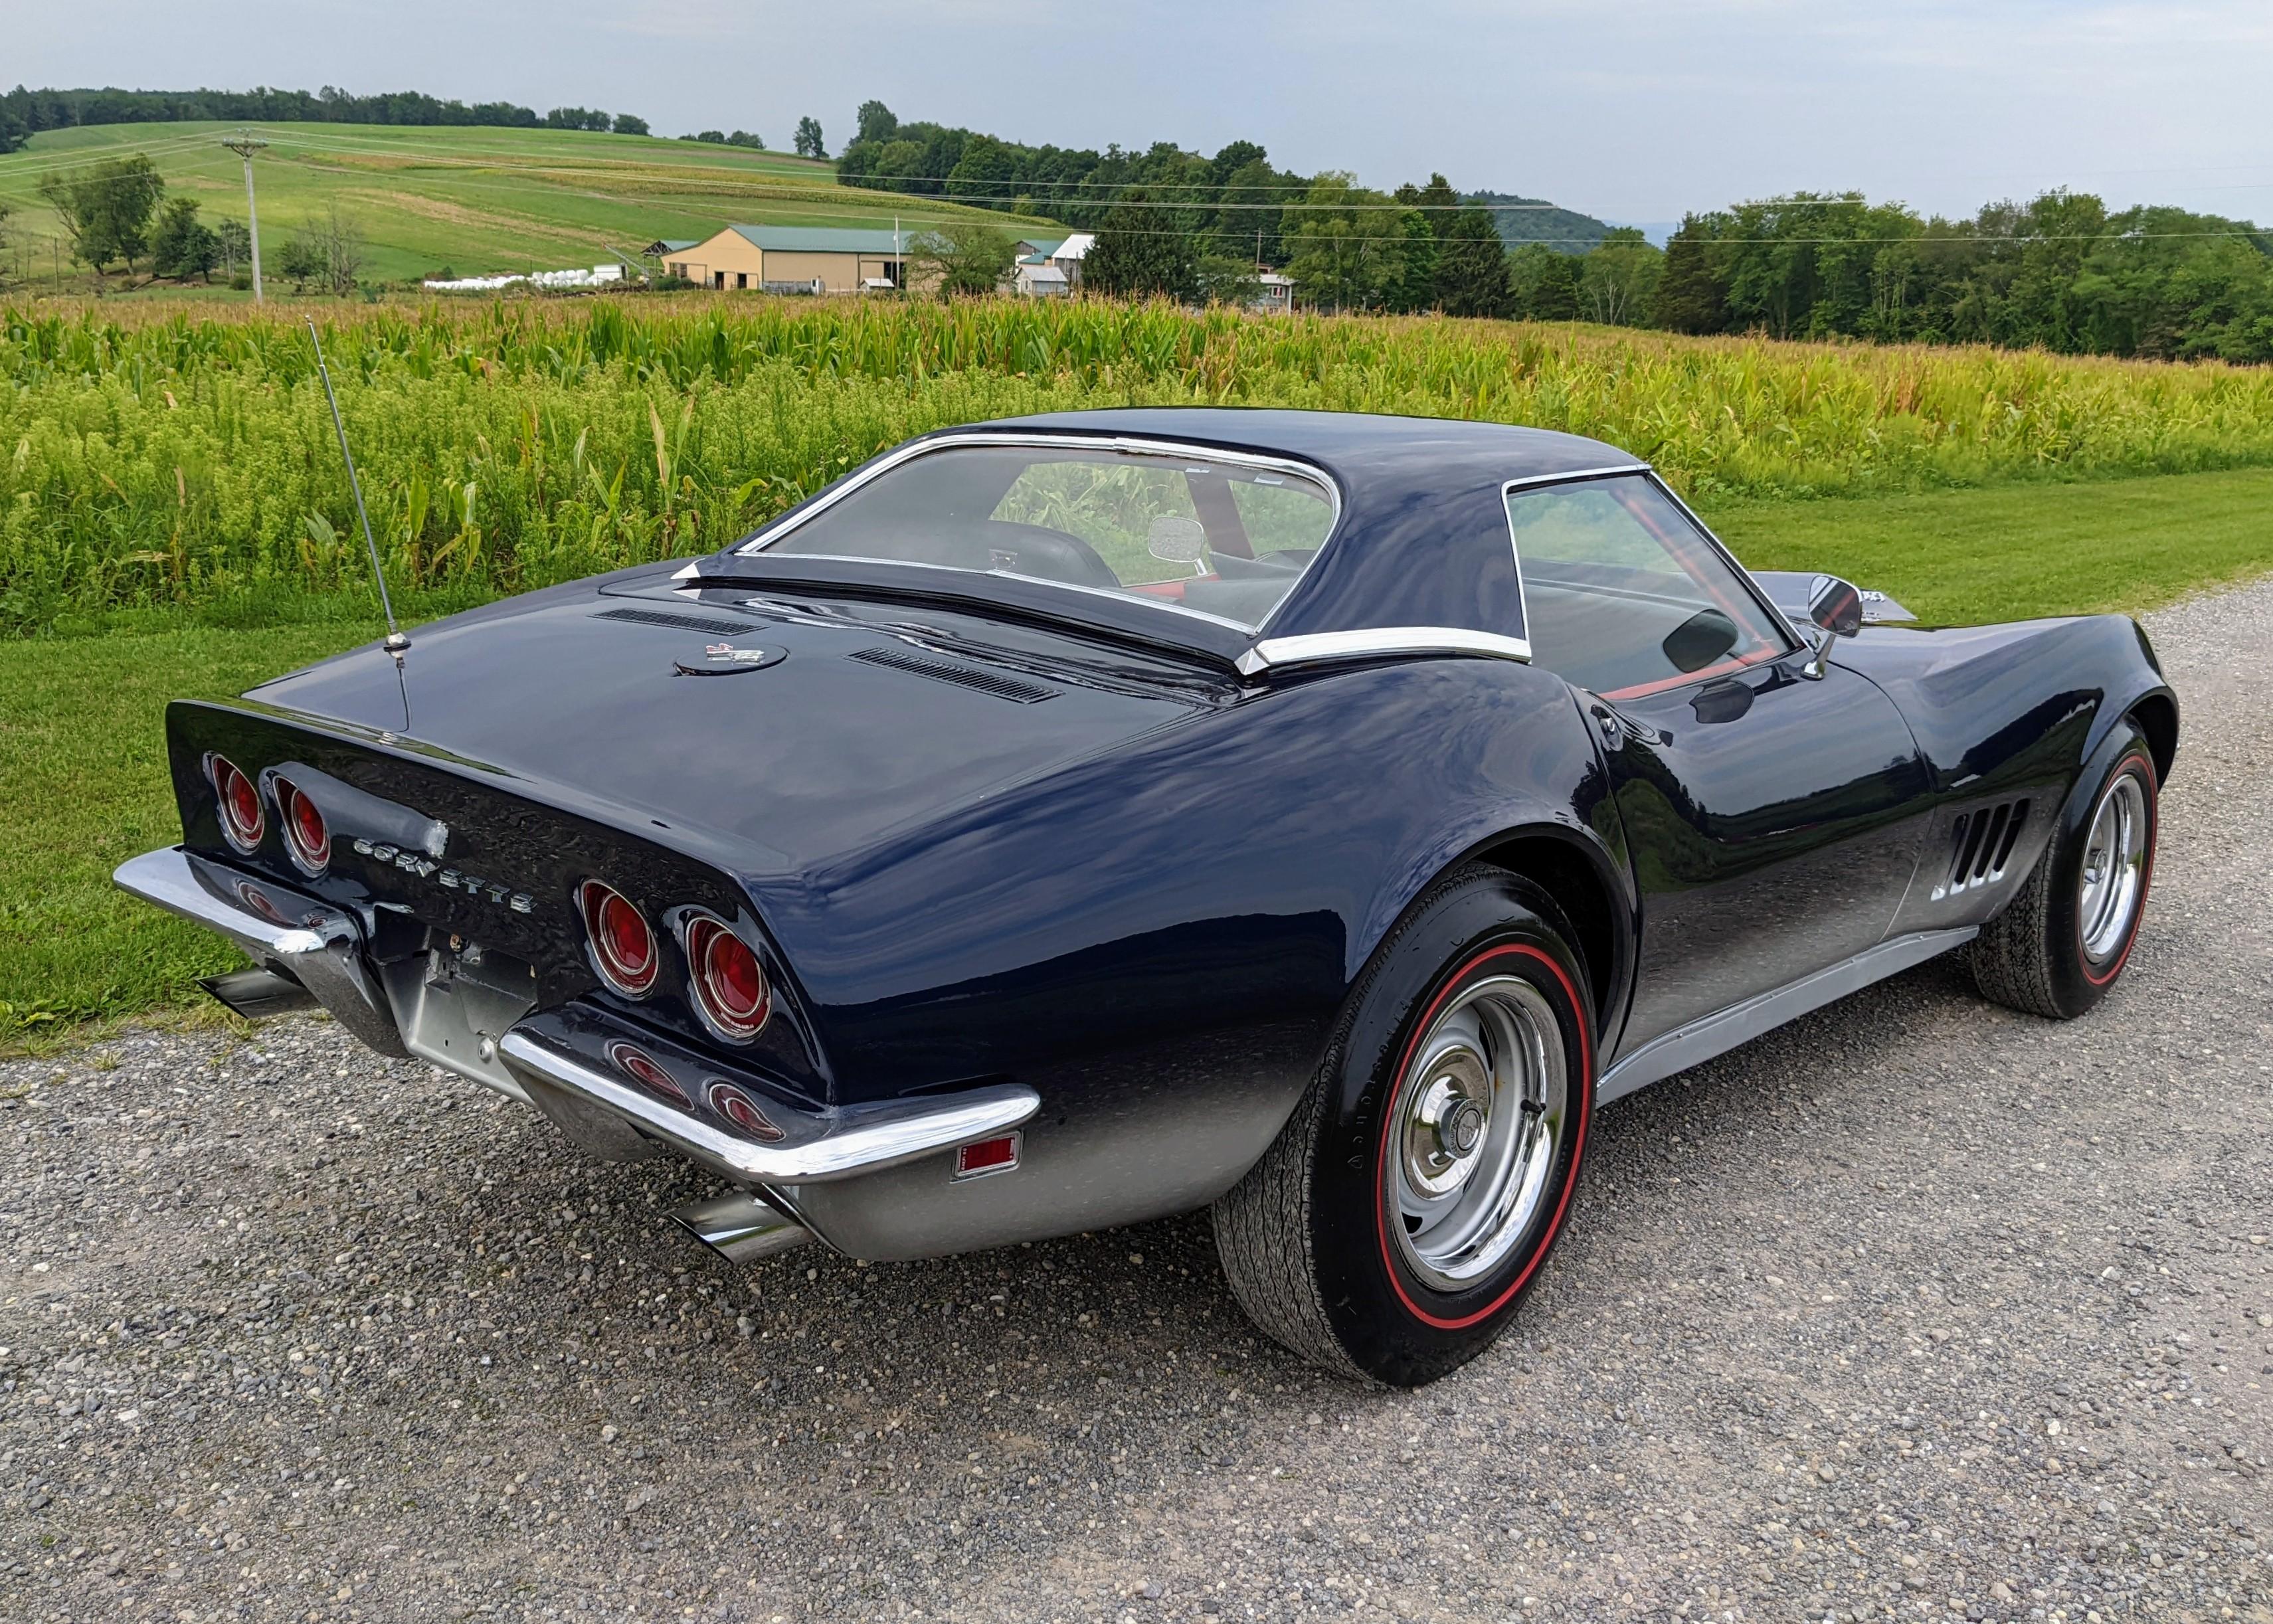 1968 Chevrolet Corvette Coupe. Big Block Engine, 4 speed. Removable hard to